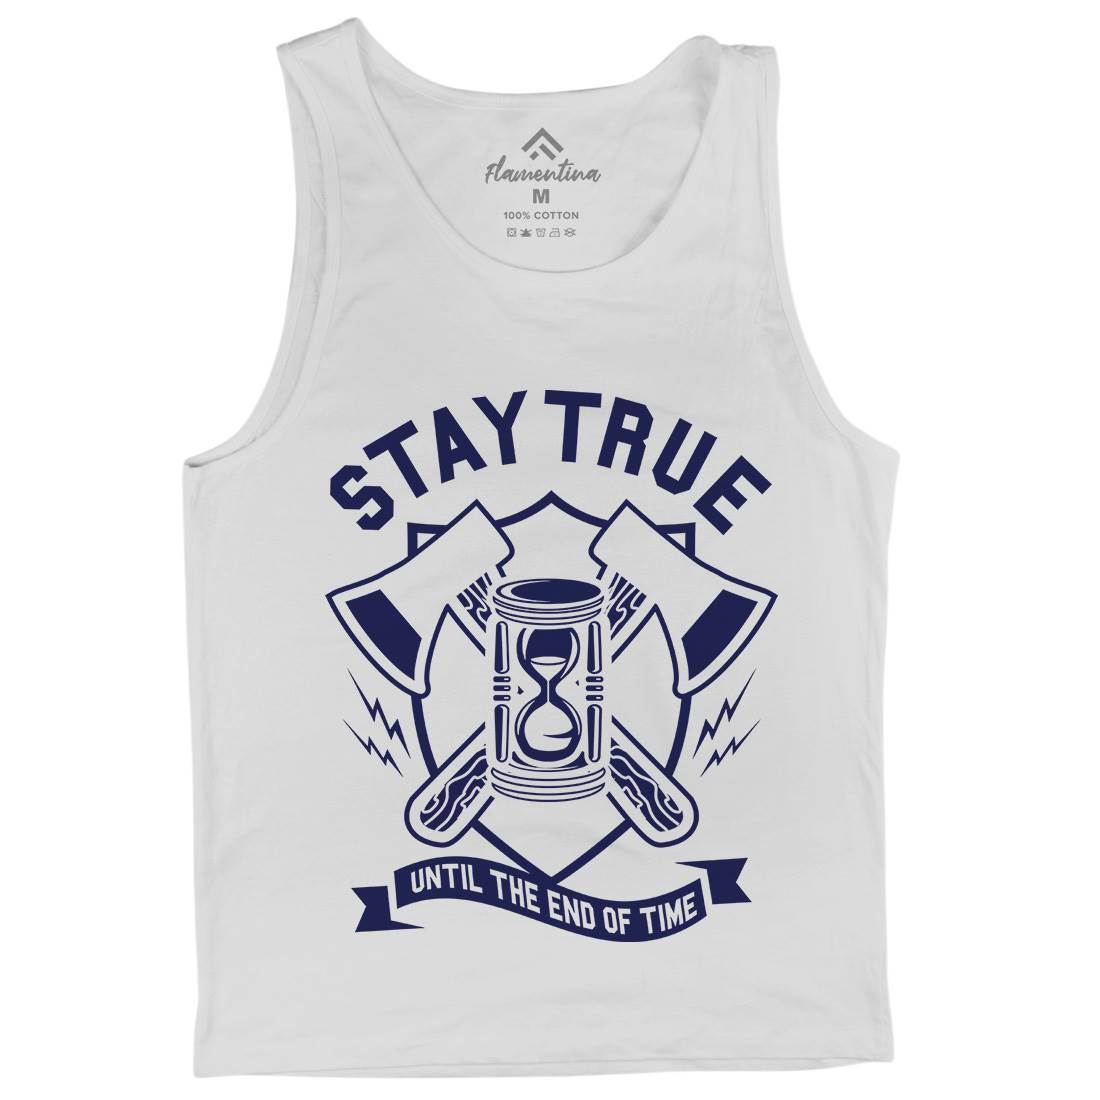 Stay True Mens Tank Top Vest Quotes A285